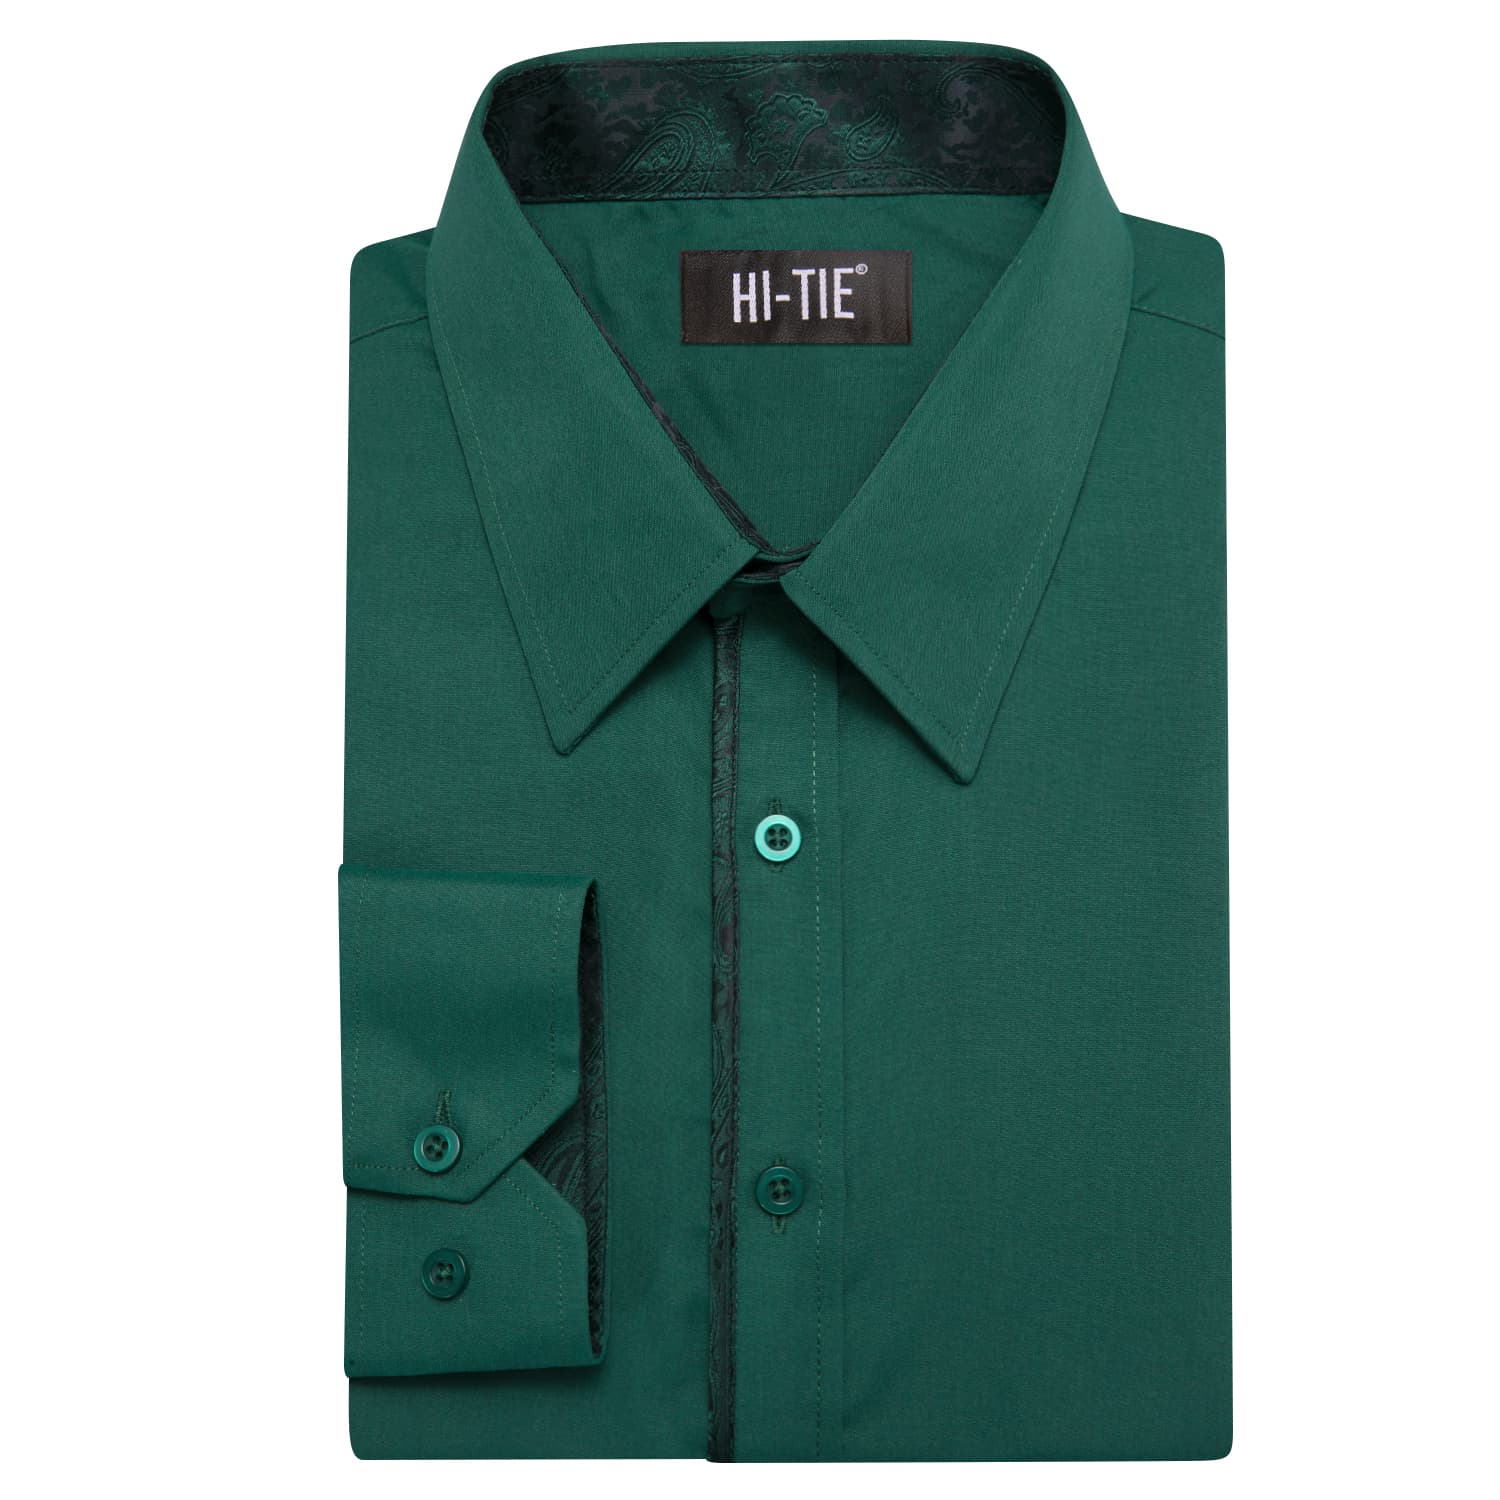 Hi-Tie Button Down Shirt Solid SeaGreen Shirt with Jacquard Collar